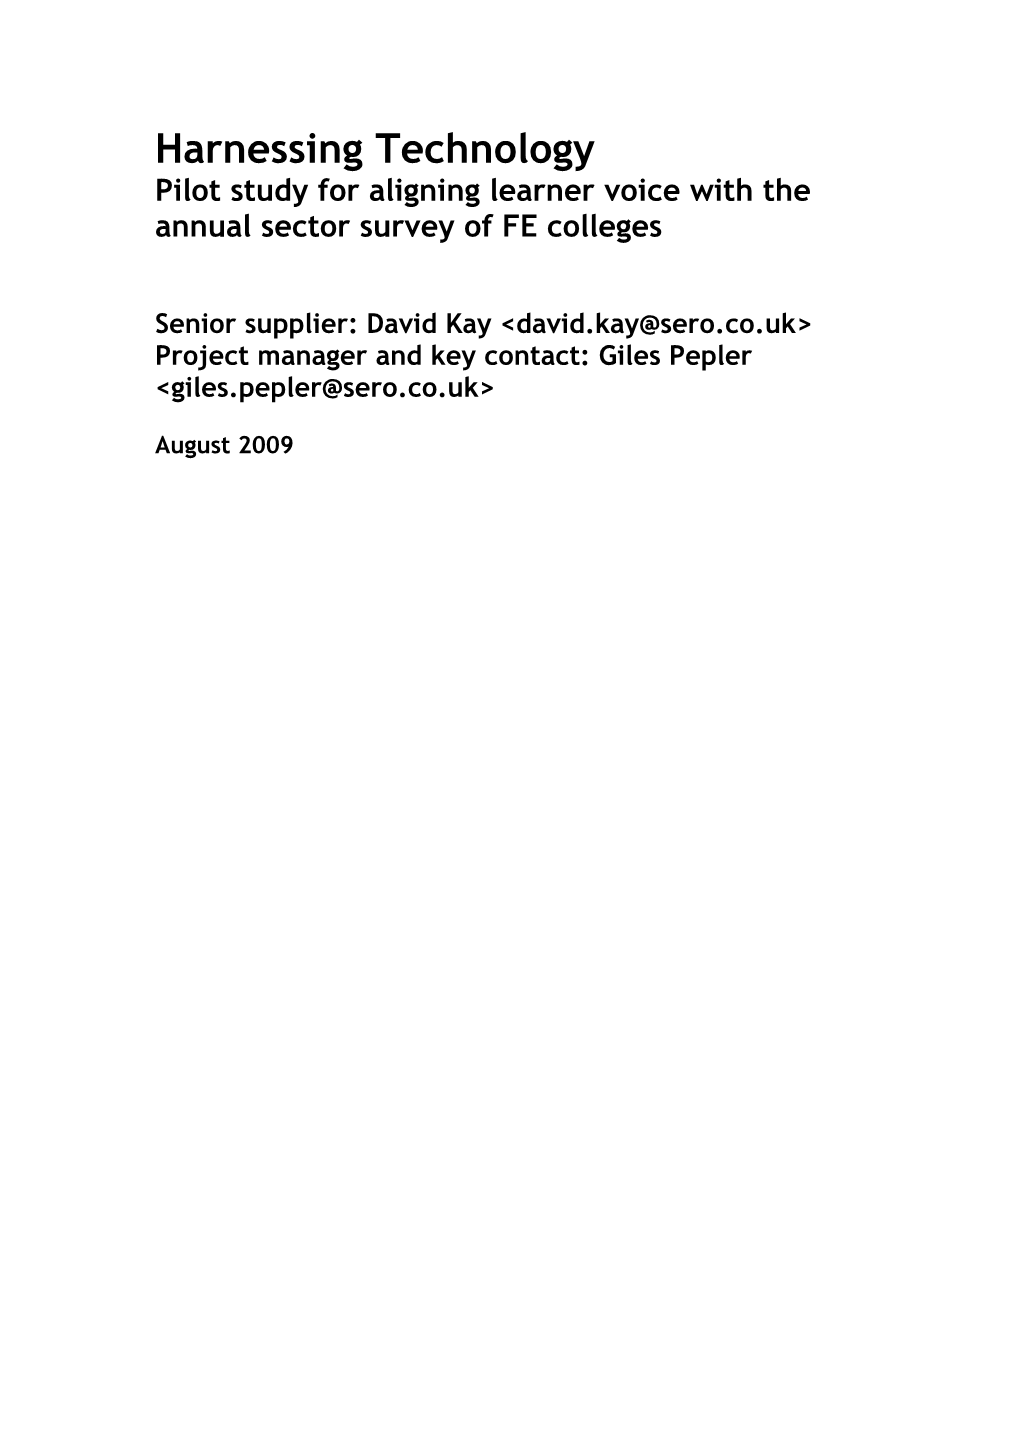 Harnessing Technology: Pilot Study for Aligning Learner Voice with the Annual Sector Survey